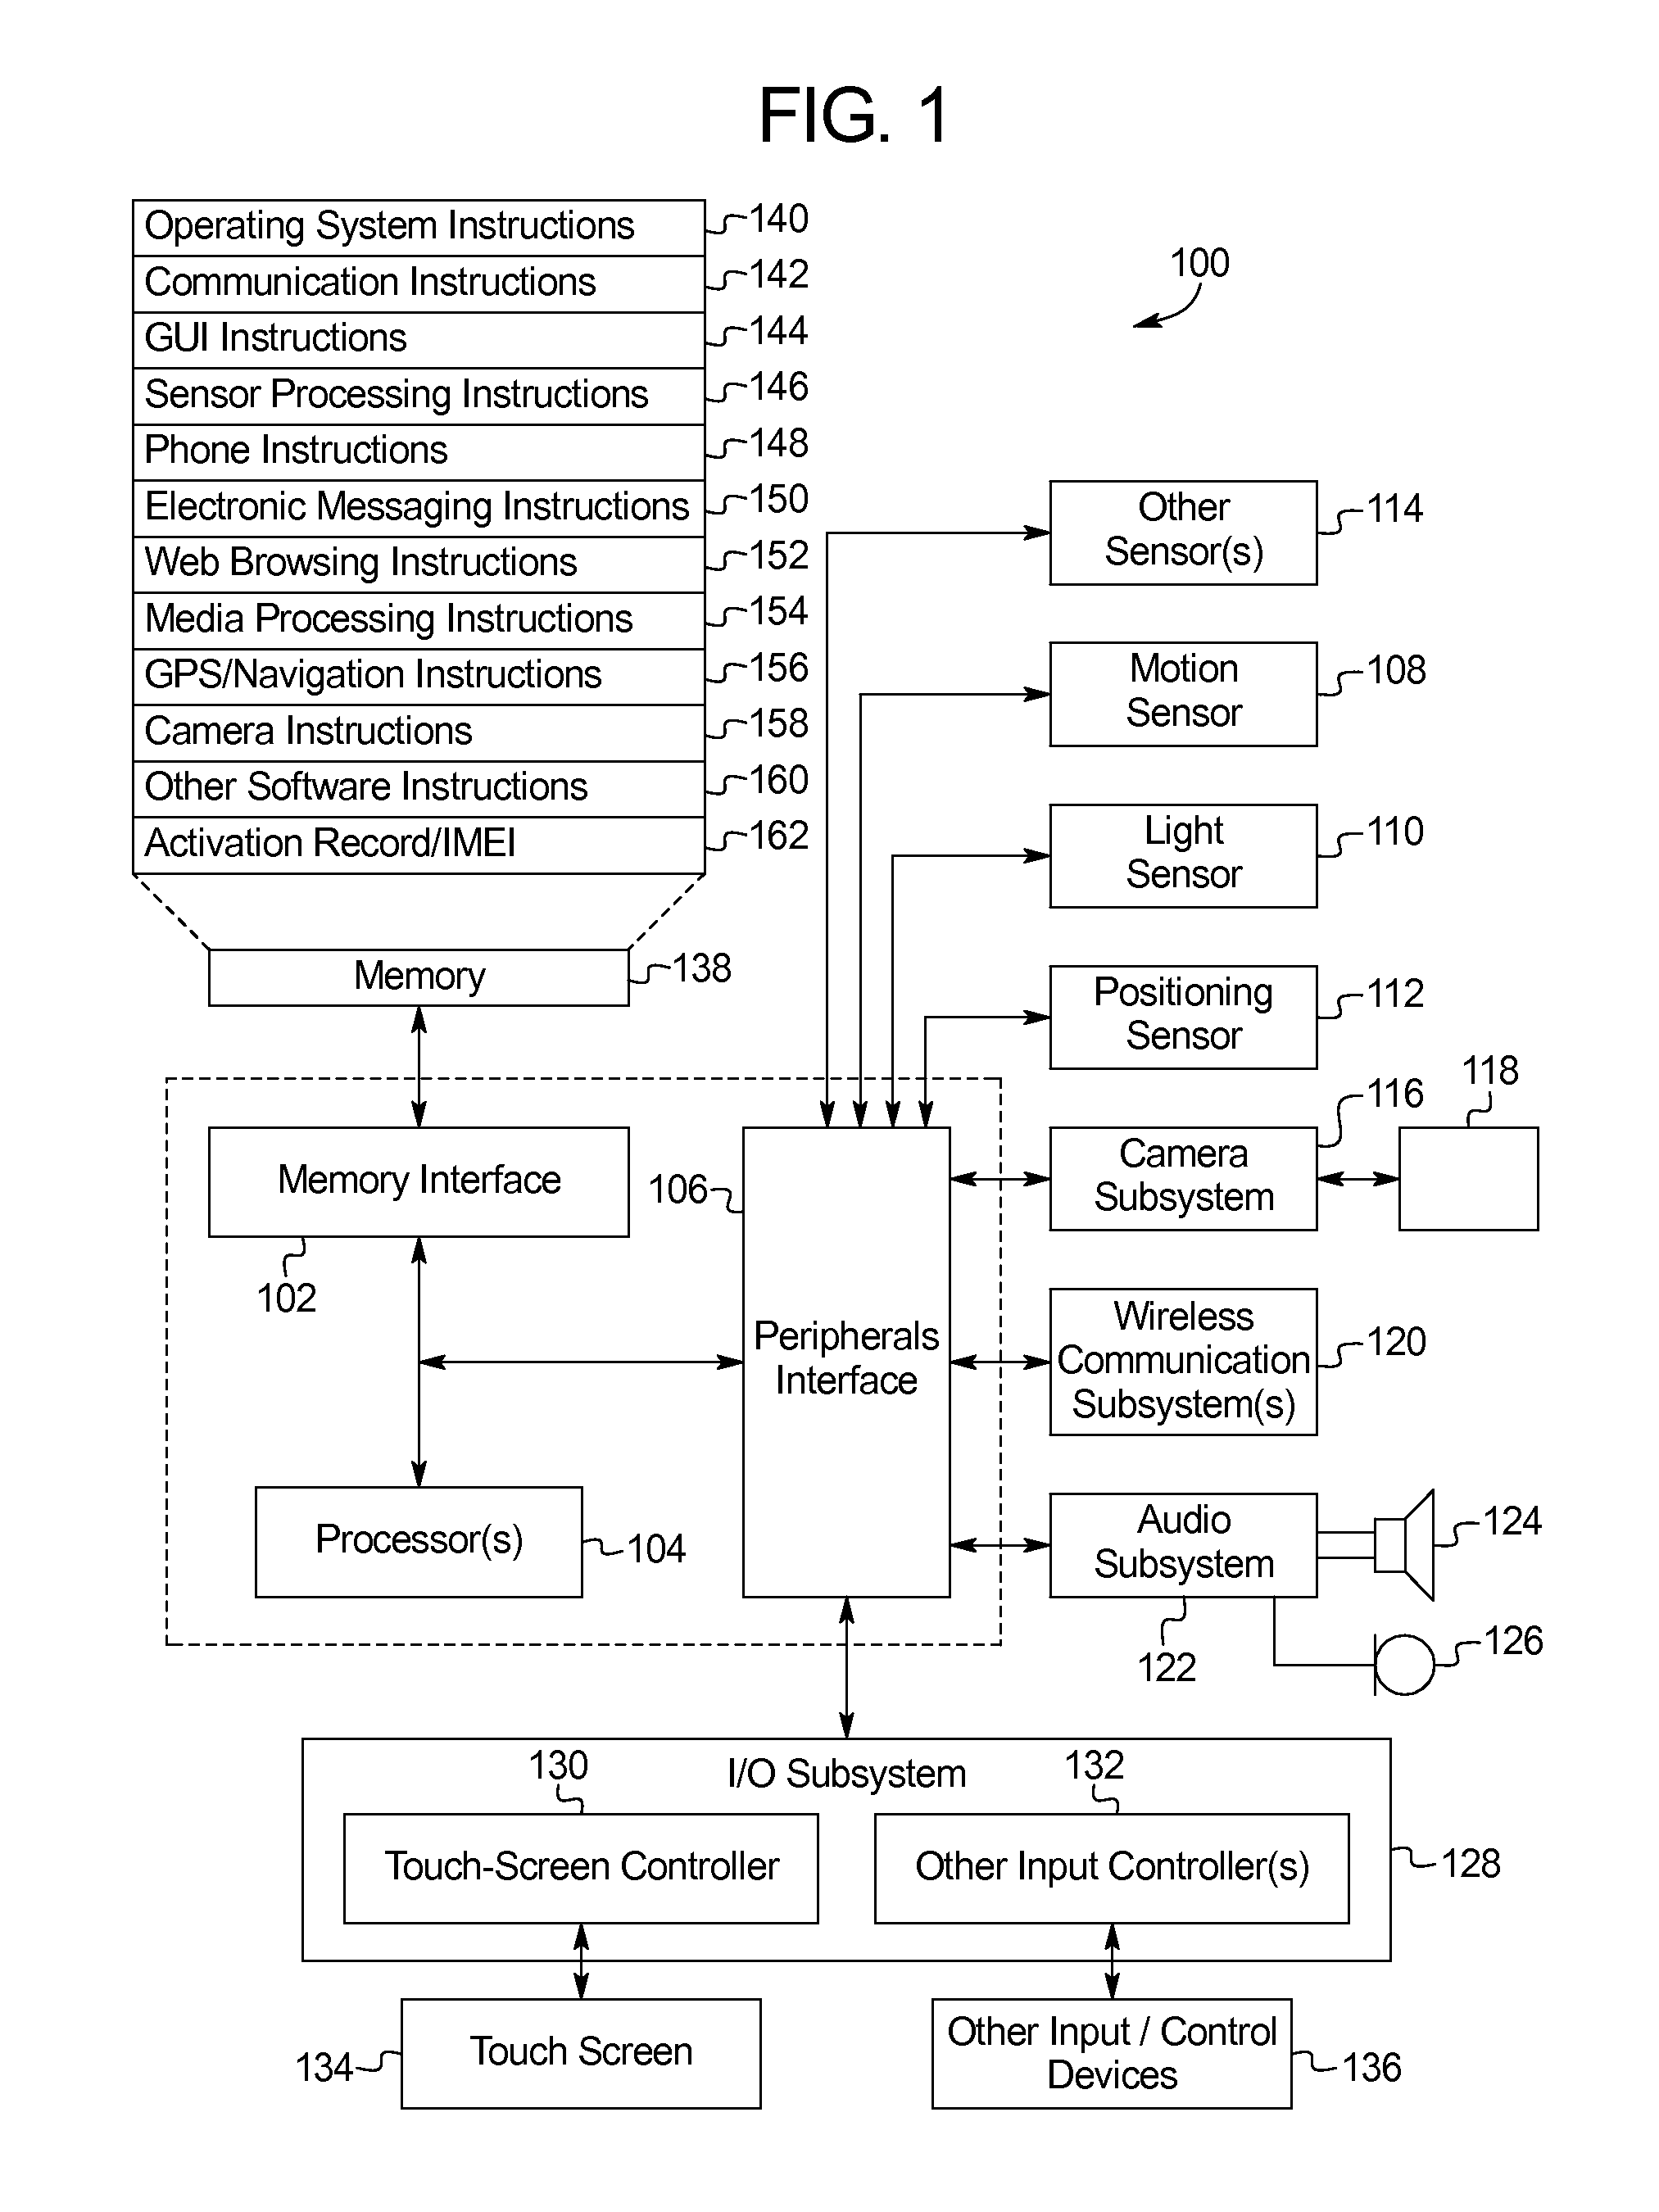 Systems and Methods for Processing Structured Data from a Document Image